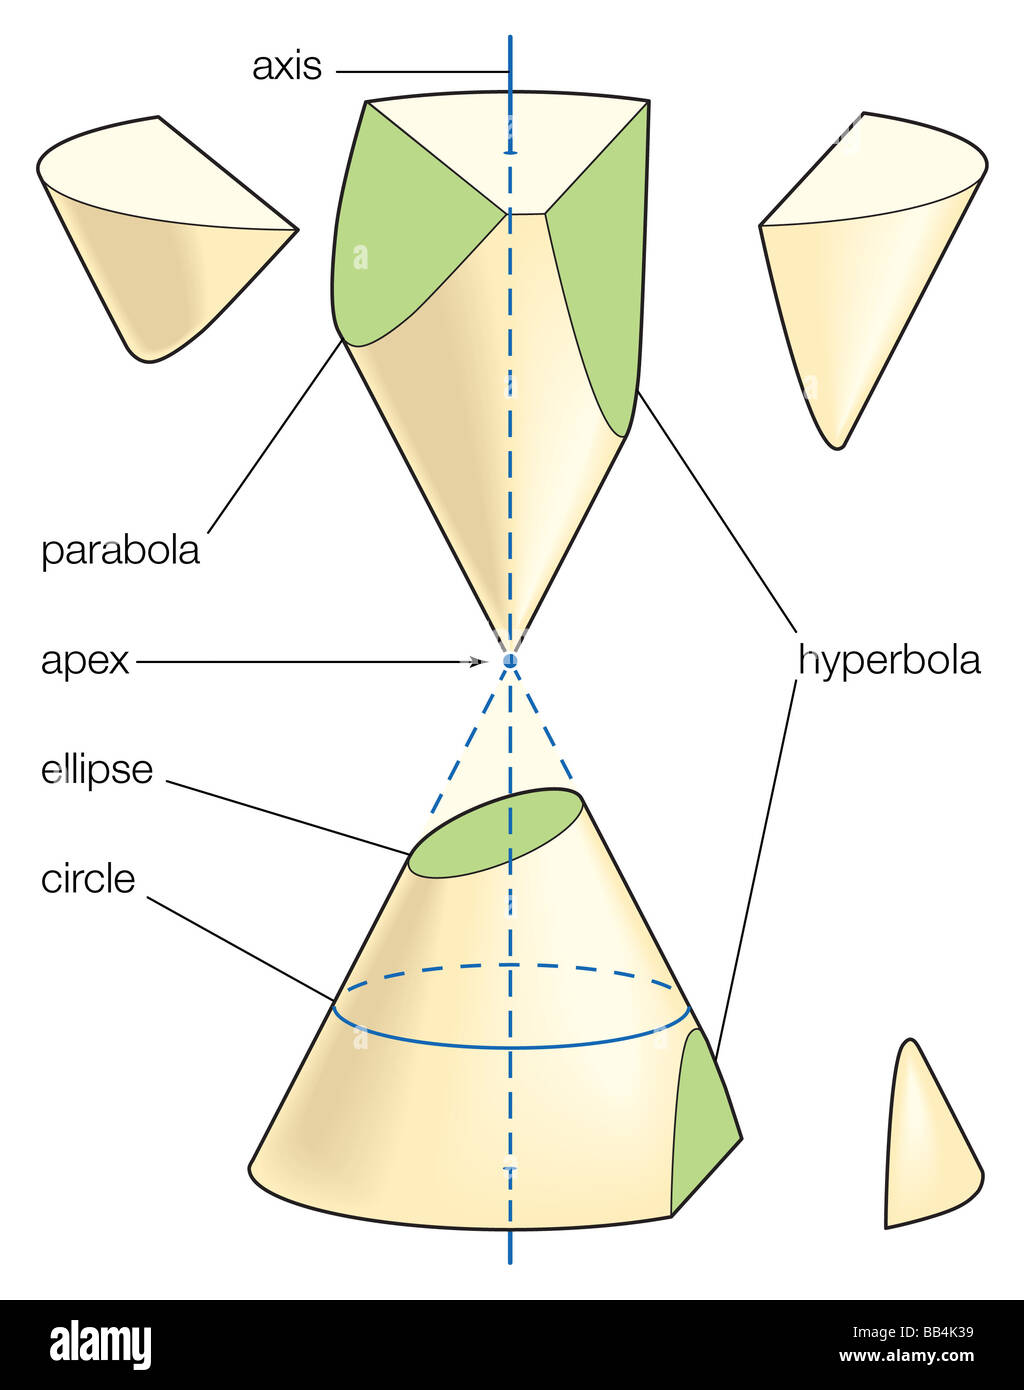 The three families of conic sections (ellipse, parabola, and hyperbola) result from intersecting a plane with a double cone. Stock Photo